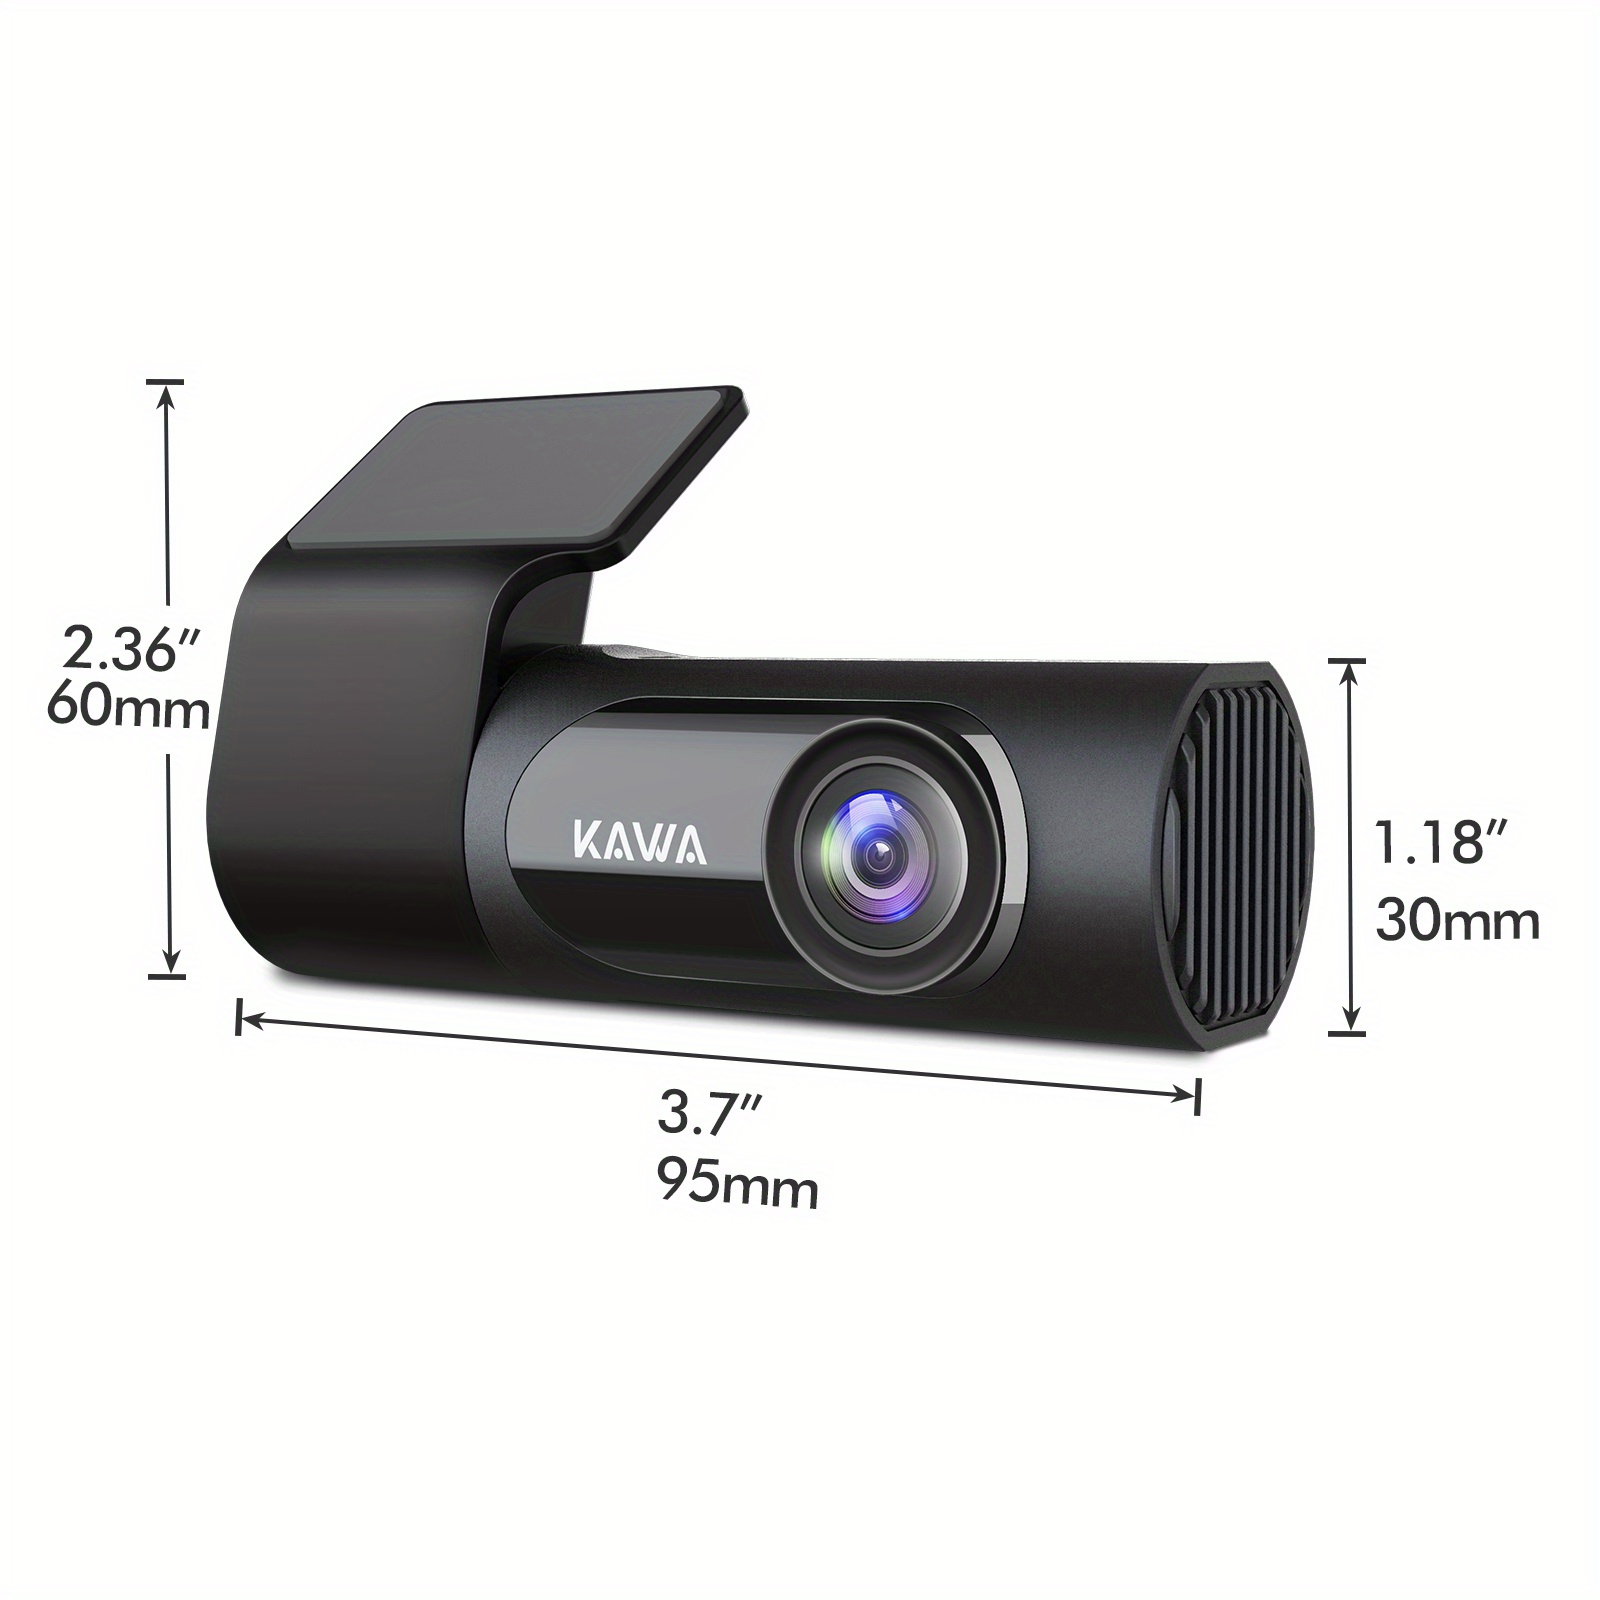 Dash Cam 2K, KAWA WiFi Dash Camera for Cars 1440P with Hand-Free Voice  Control, Mini Hidden Dashcam Front, Emergency Lock, 24Hour Parking Monitor,  APP